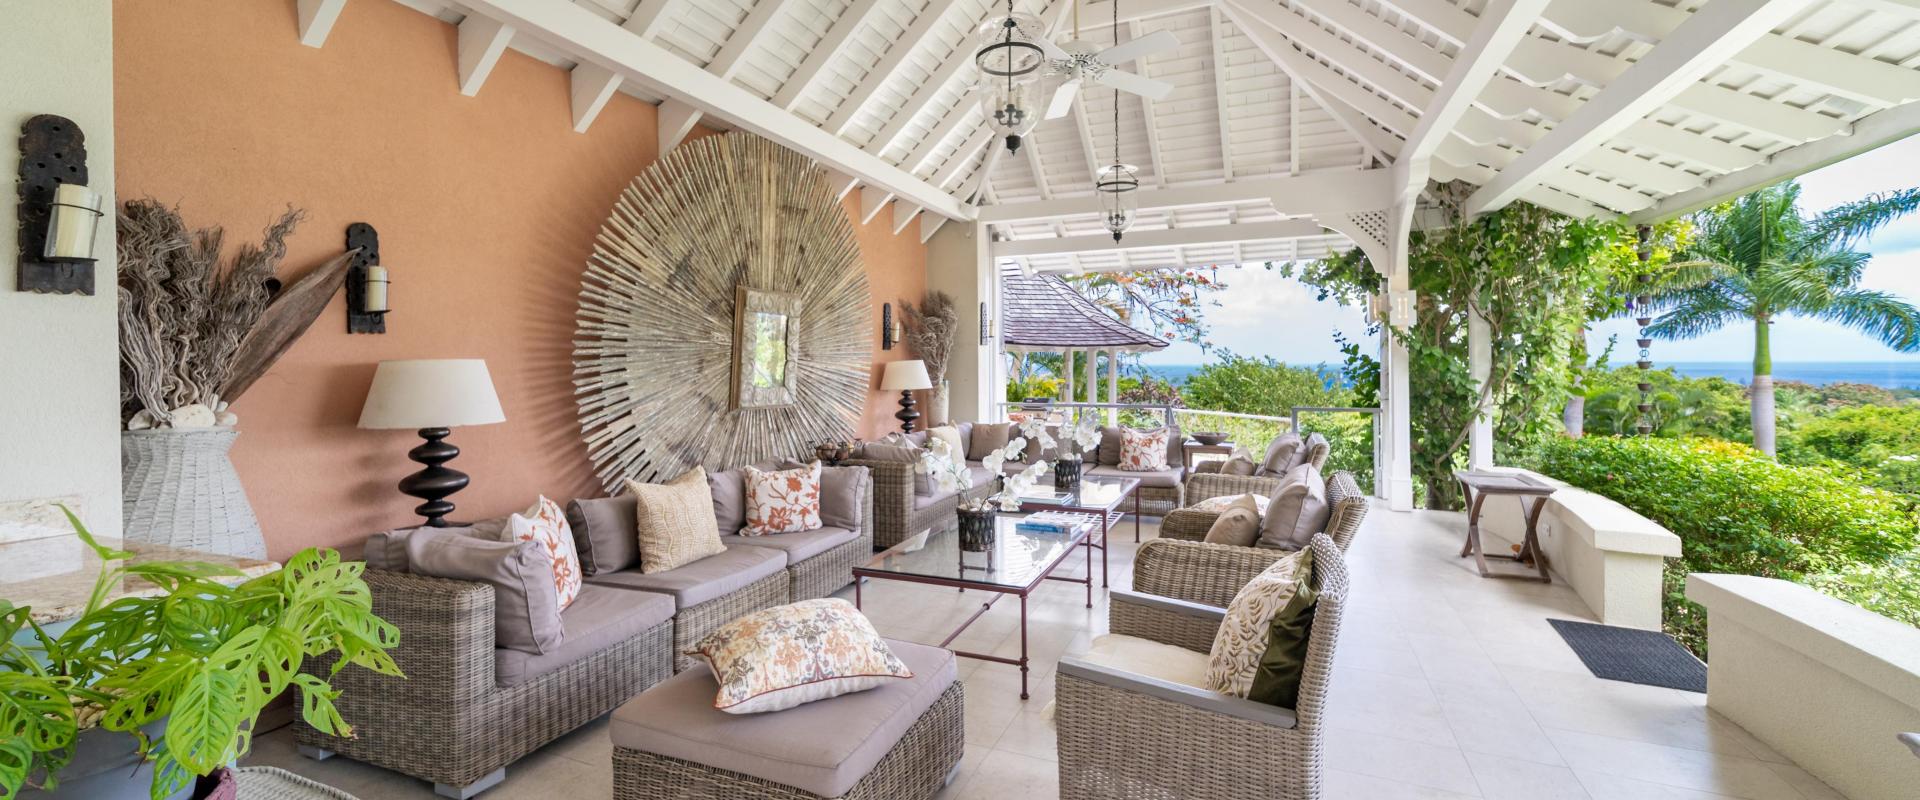 Point of View Holiday Rental In Sandy Lane Barbados Outdoor Living Room with Garden and Pool Views